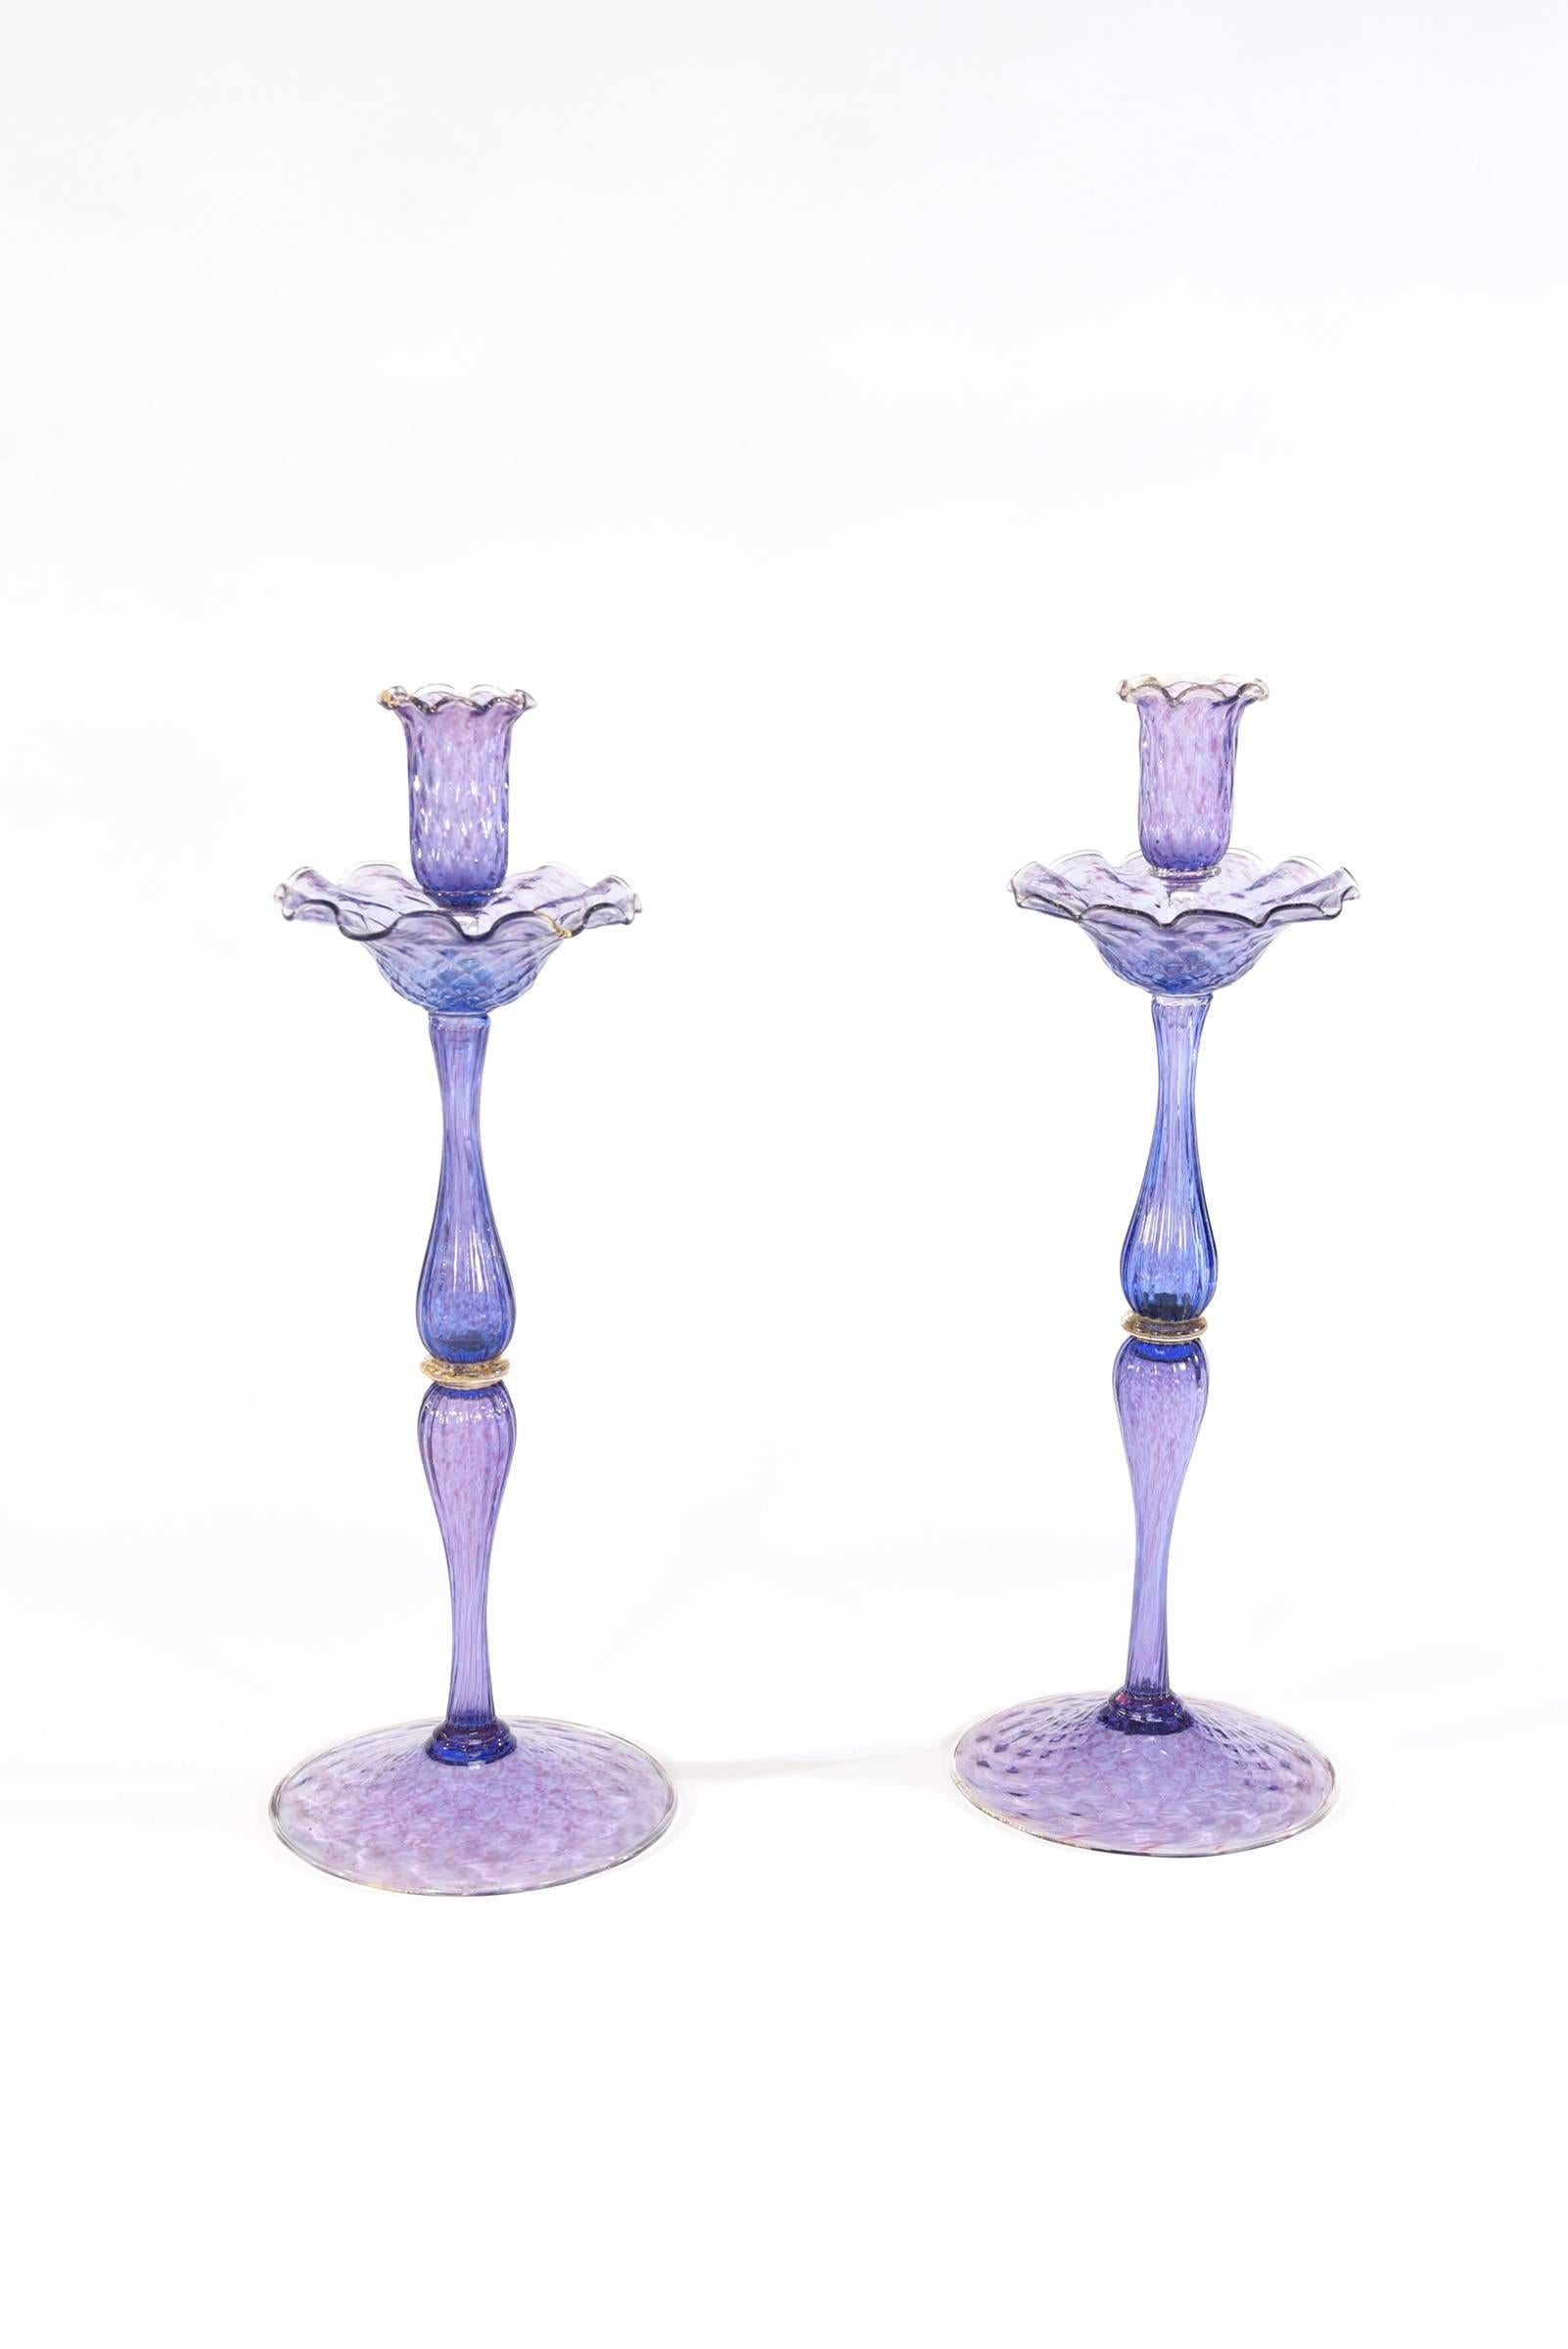 Your table will be magnificent when you set it with this three-piece centrepiece set of handblown Venetian glass. The unusual and rare color of amethyst/lavender is highlighted with gold leaf inclusions. The tall and elegant candlesticks rise above